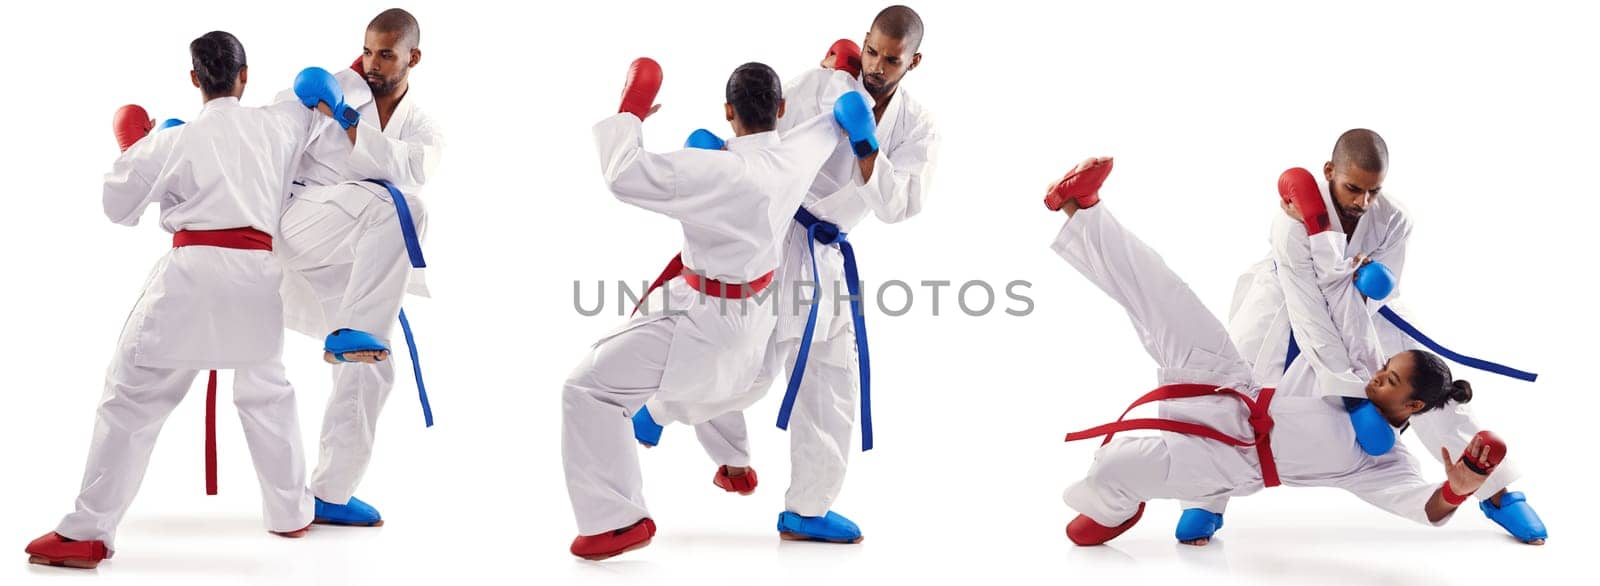 Karate, fight and people in studio exercise, training with gloves on fist or collage of class. Composite, montage and student learning from teacher in martial arts with kick or punch technique.